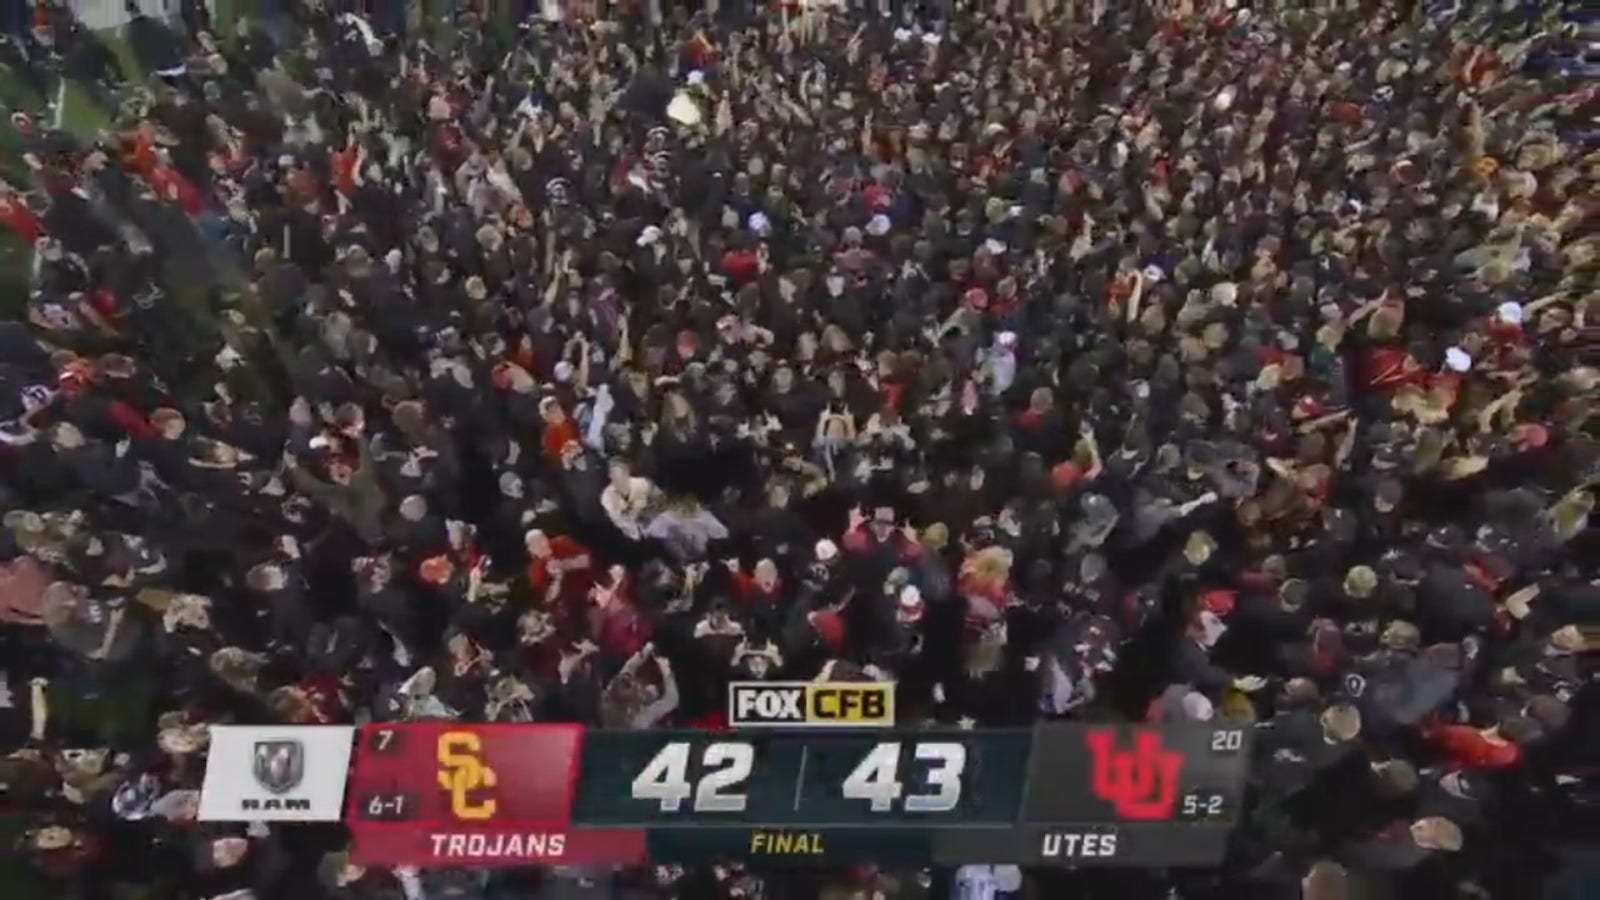 Utah fans rush field after defeating USC